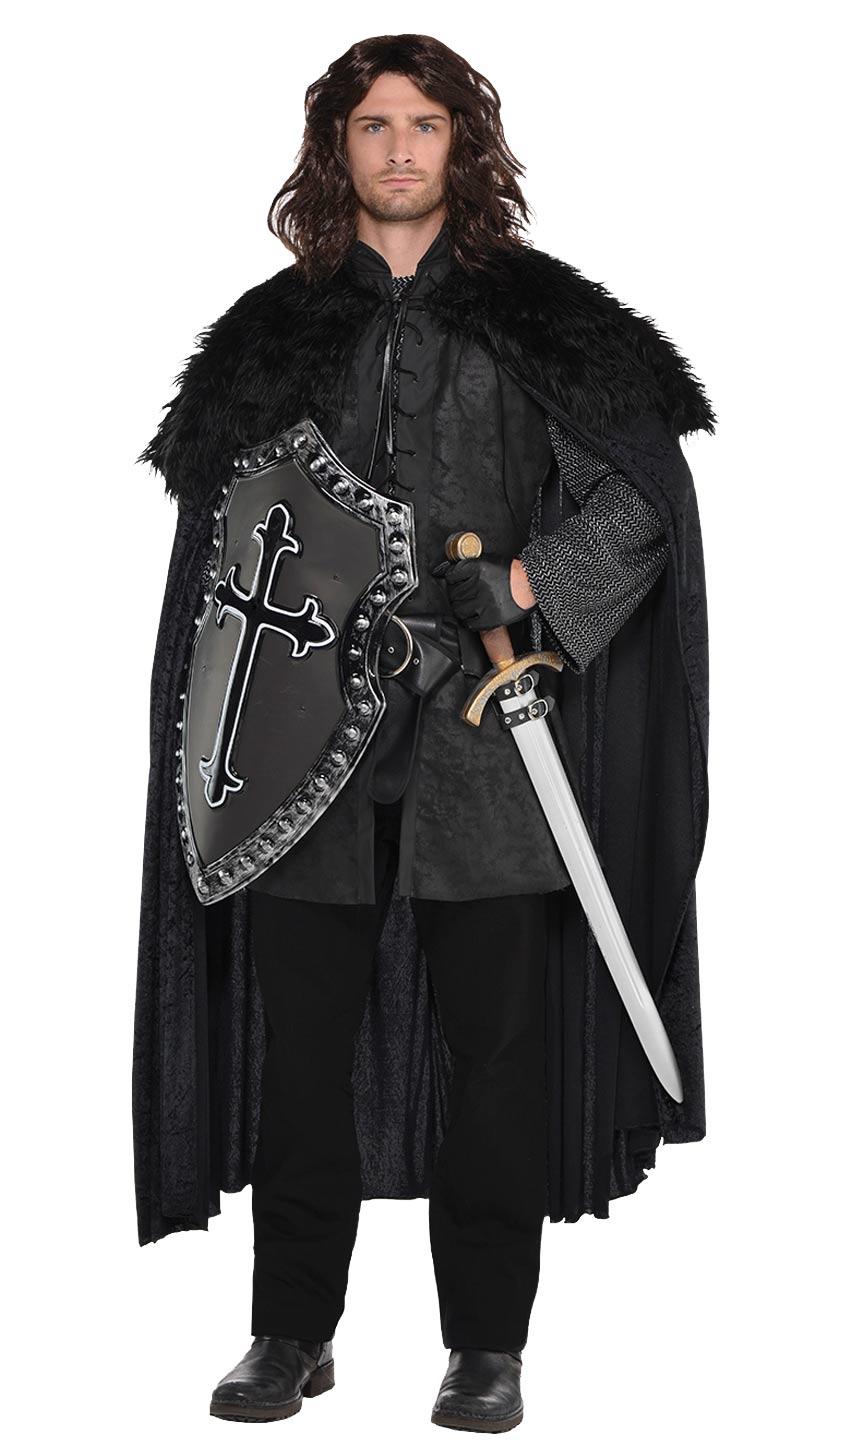 Warrior Cape Adult in black with wide faux fur collar by Amscan 847451 available here at Karnival Costumes online party shop